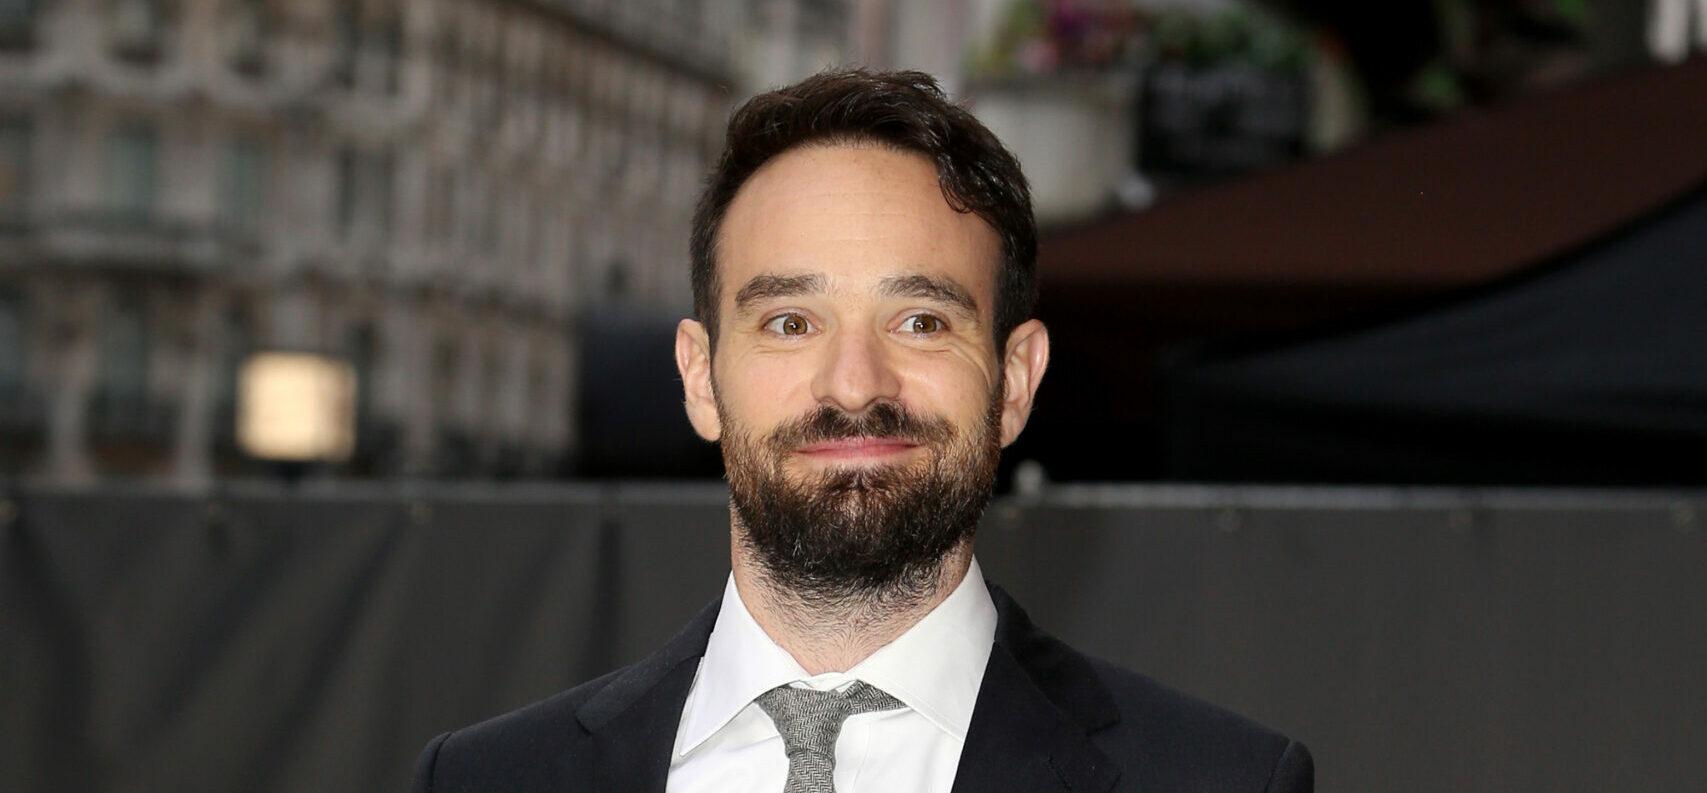 Charlie Cox at the "King of Thieves" World premiere in London, UK.